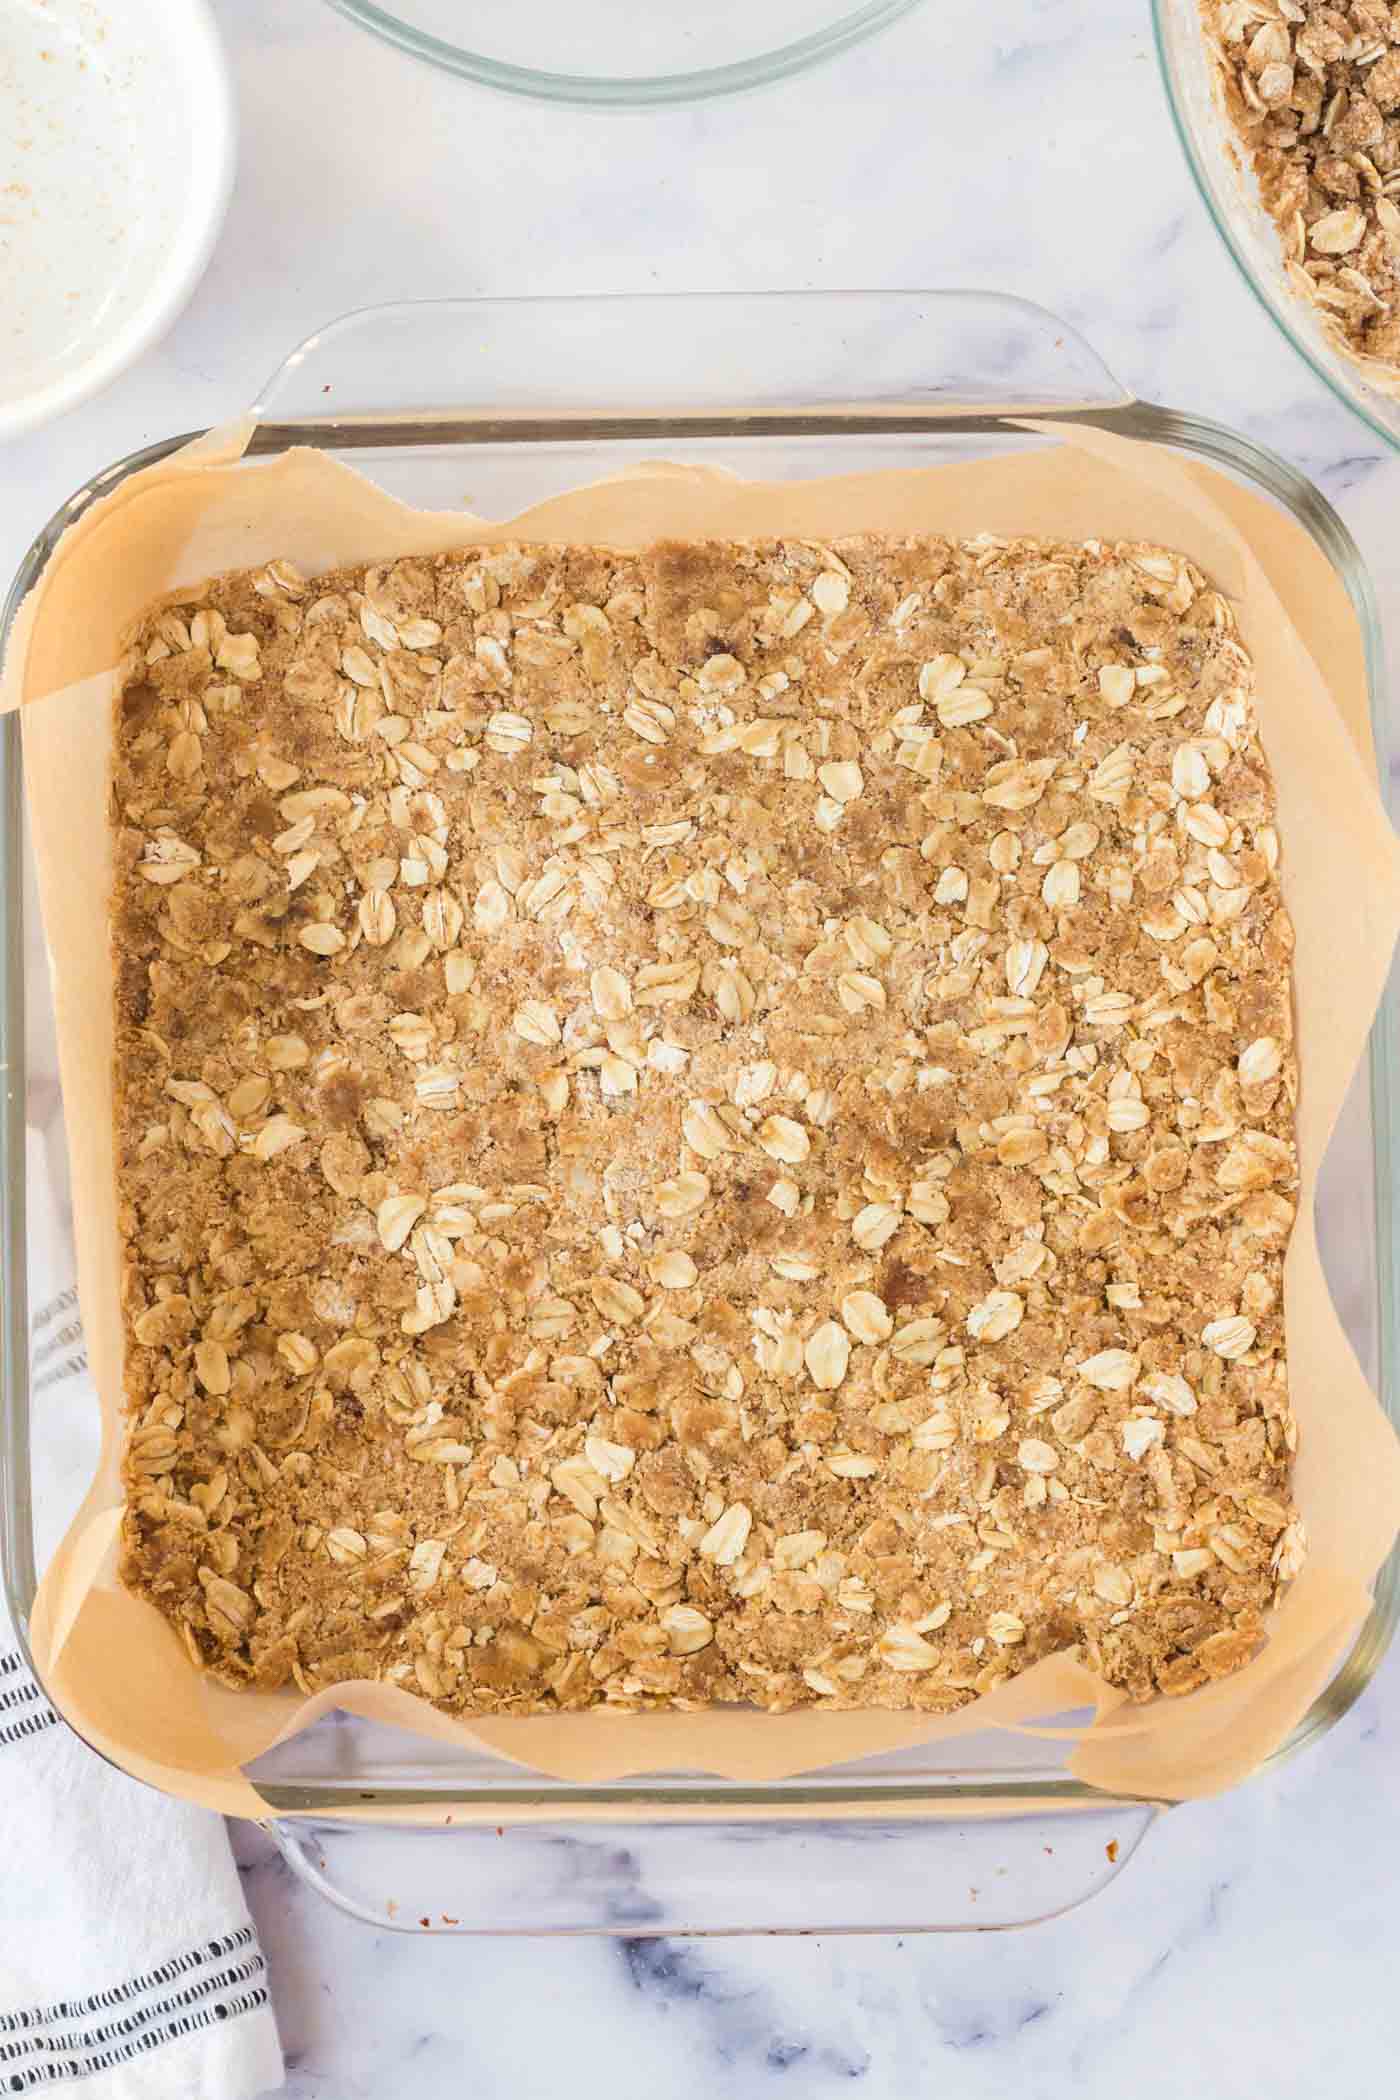 An oatmeal crust pressed into a square glass baking dish lined with parchment paper.